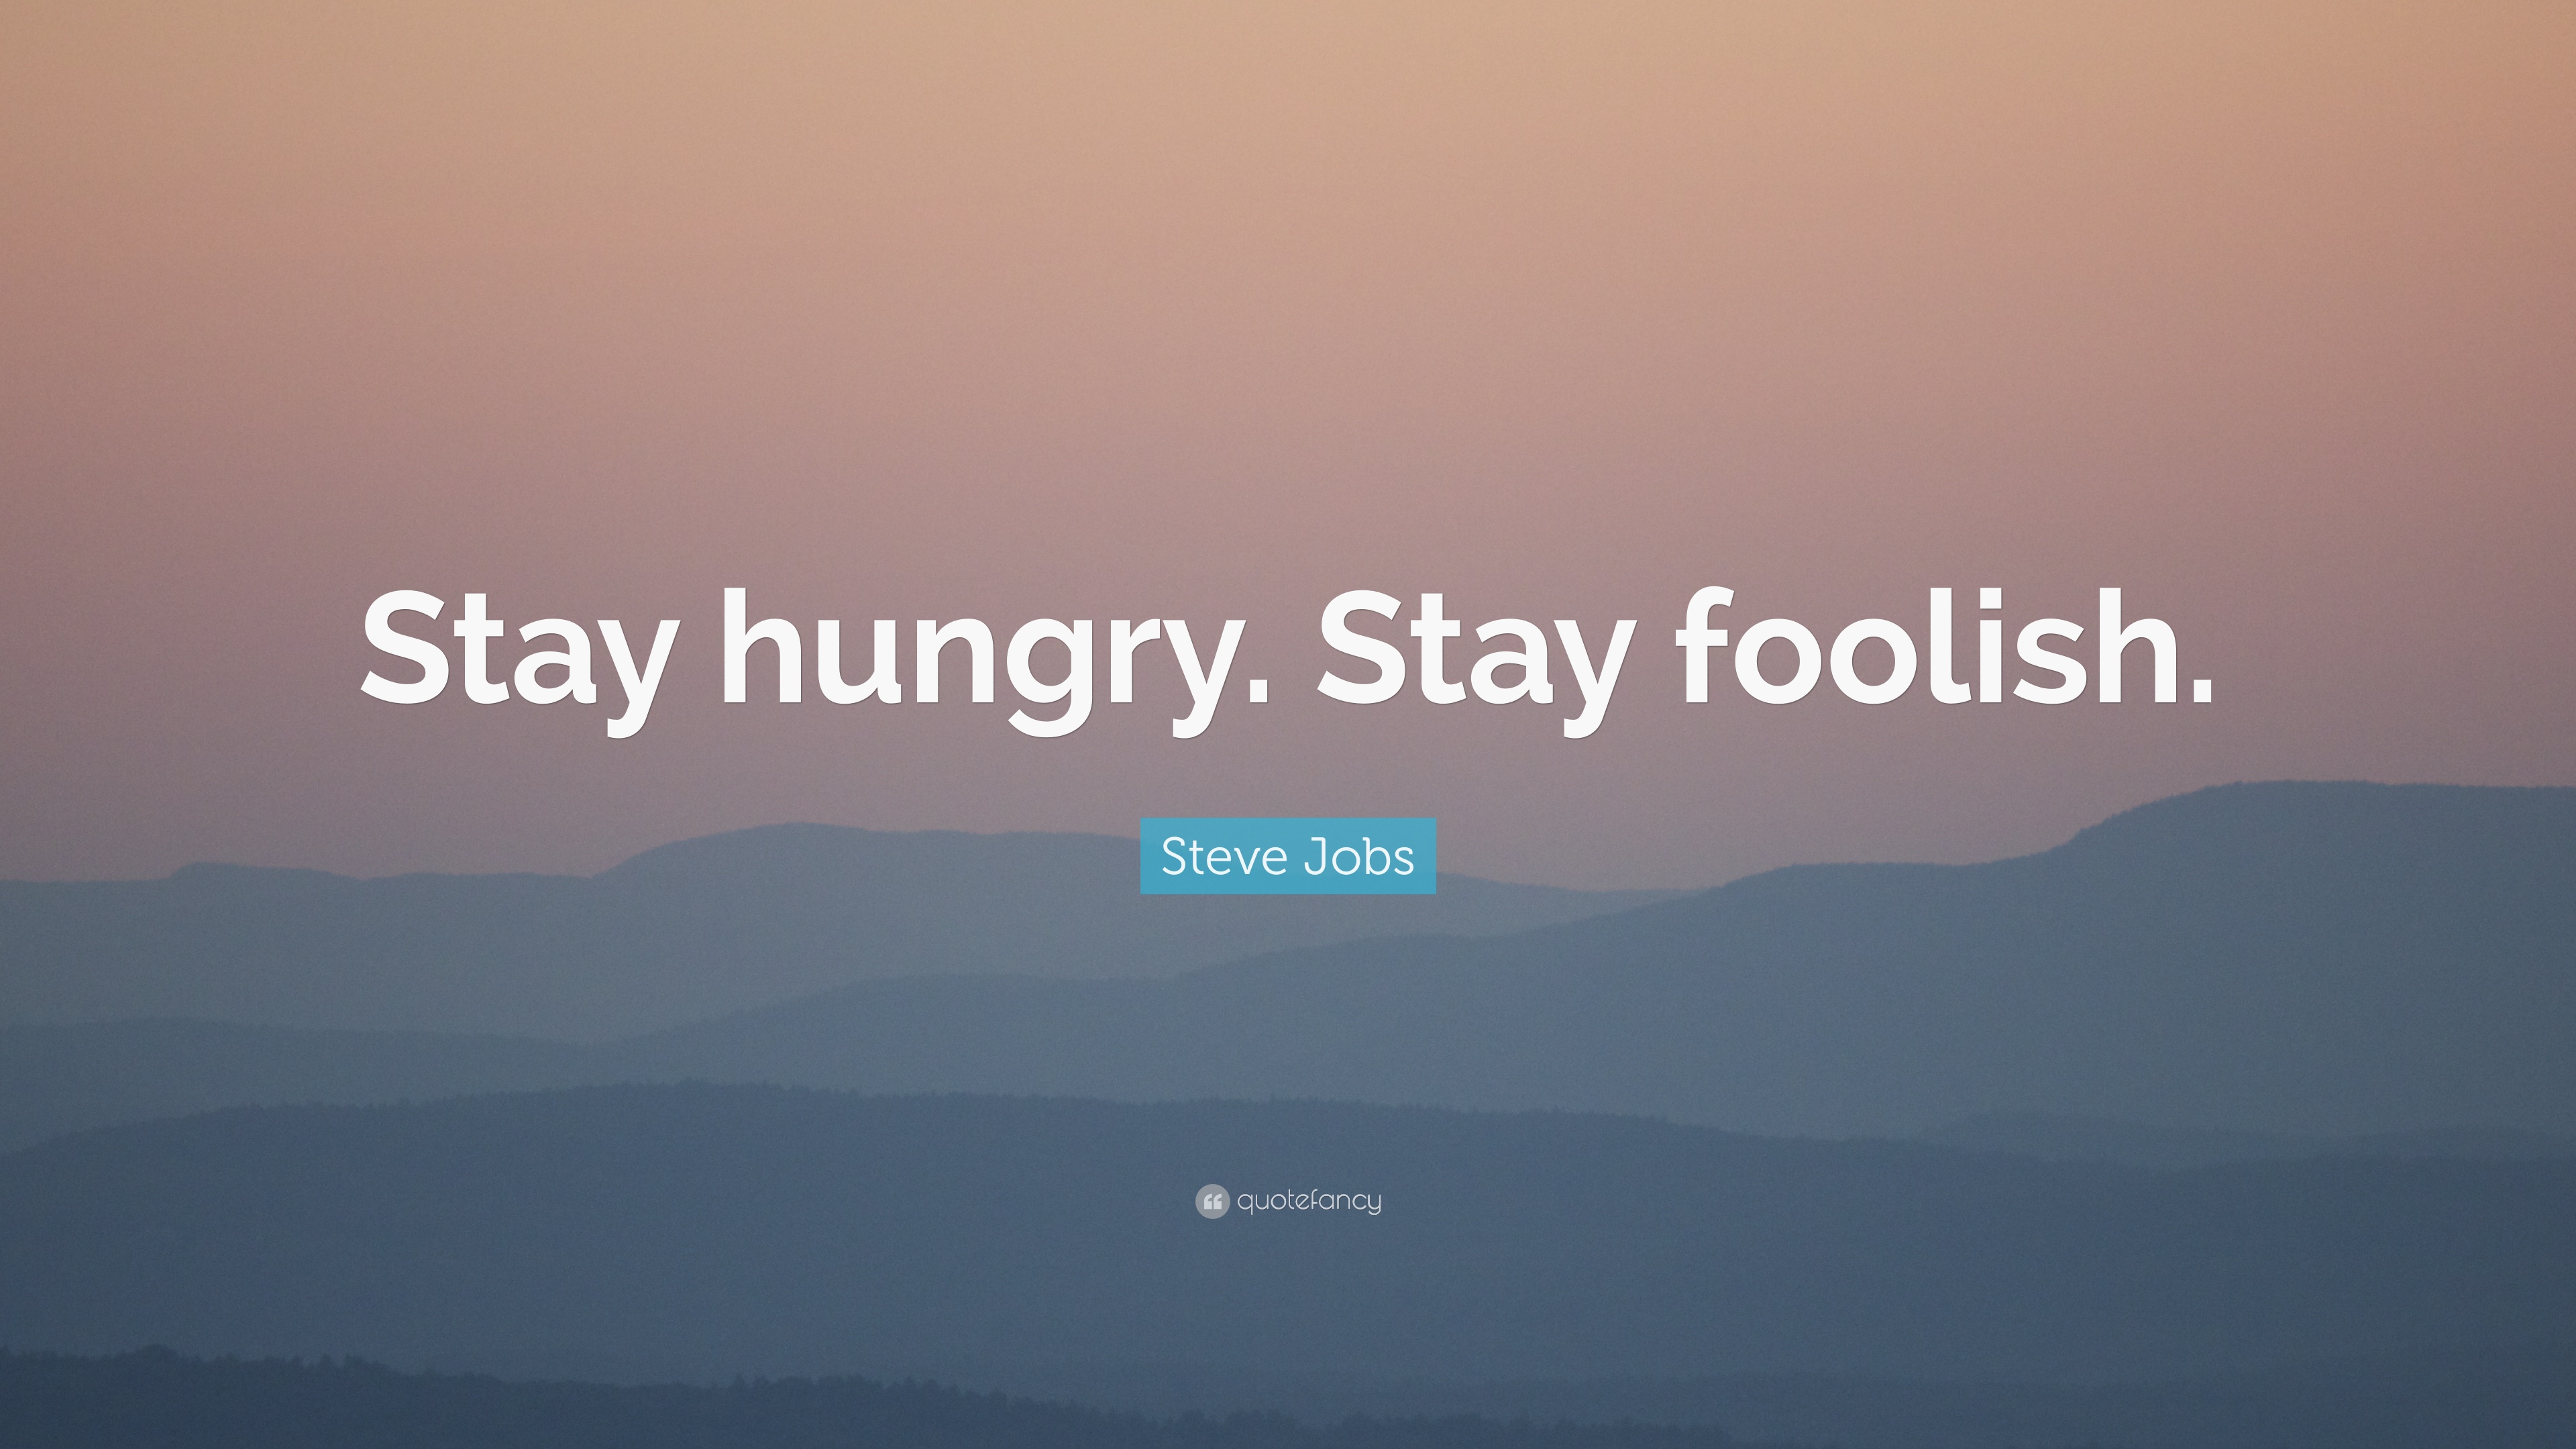 Steve Jobs Quote Stay hungry. Stay foolish. 19 wallpapers